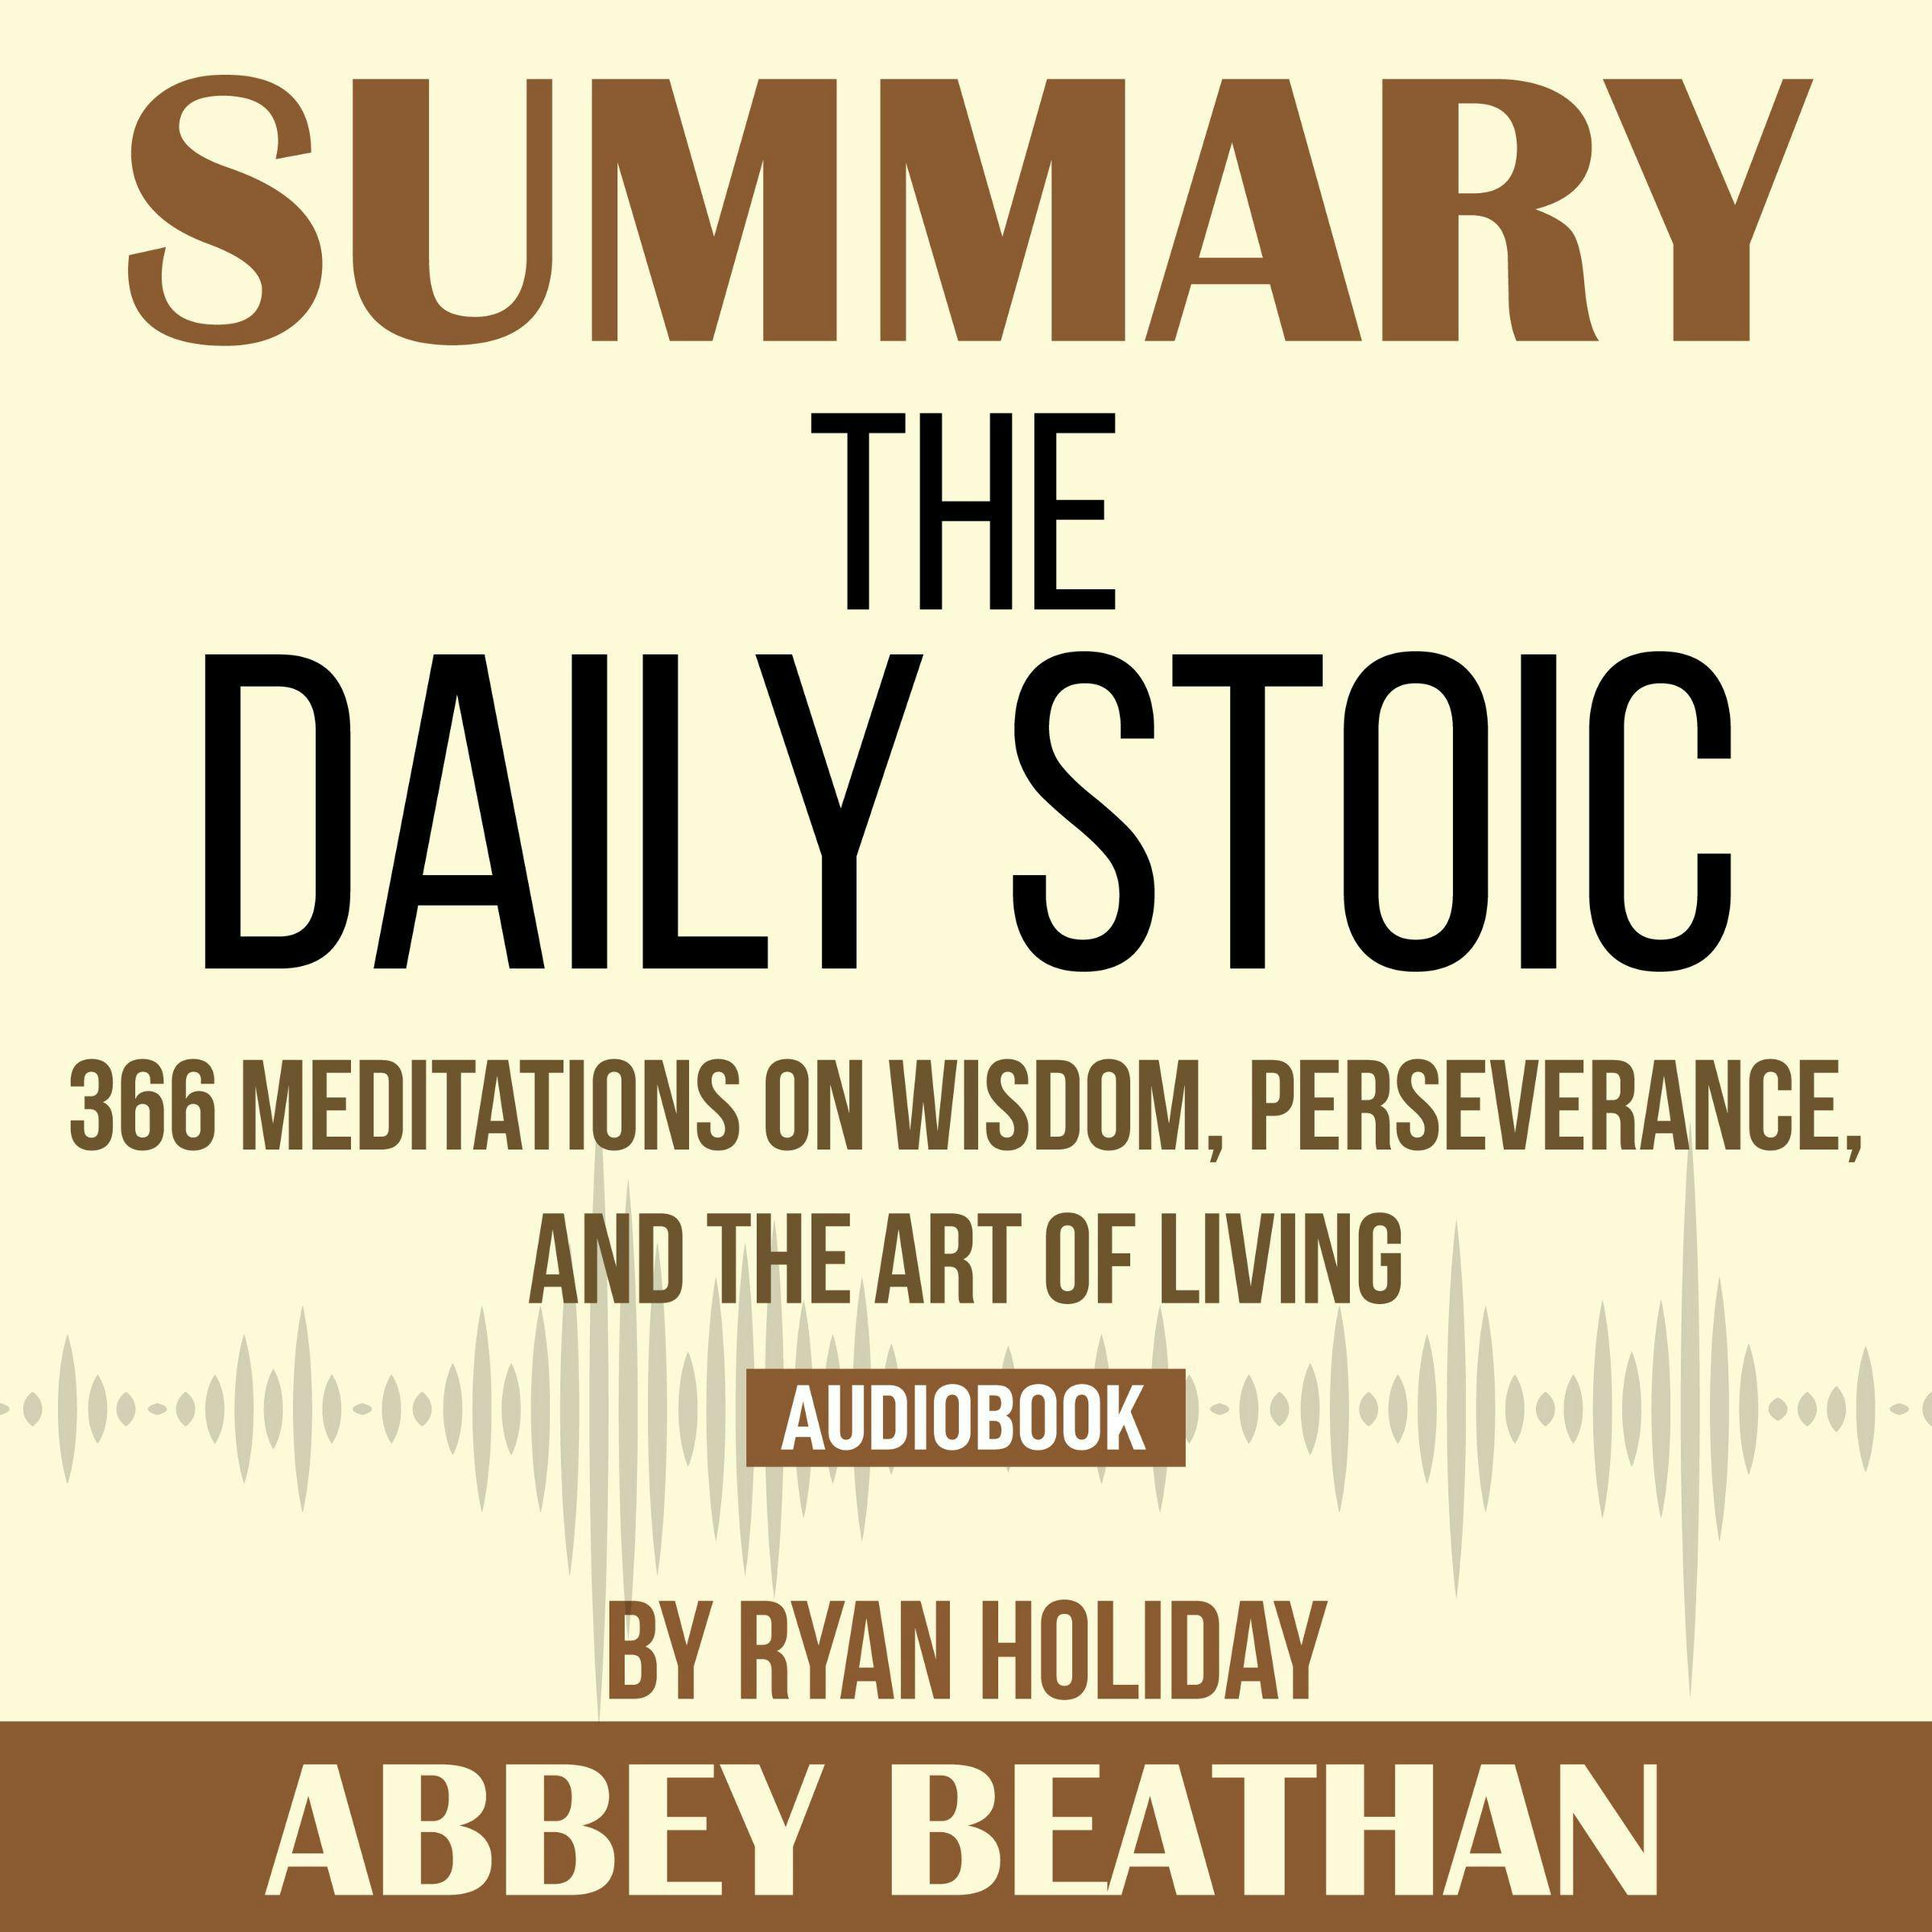 Summary of The Daily Stoic: 366 Meditations on Wisdom, Perseverance, and the Art of Living by Ryan Holiday - undefined